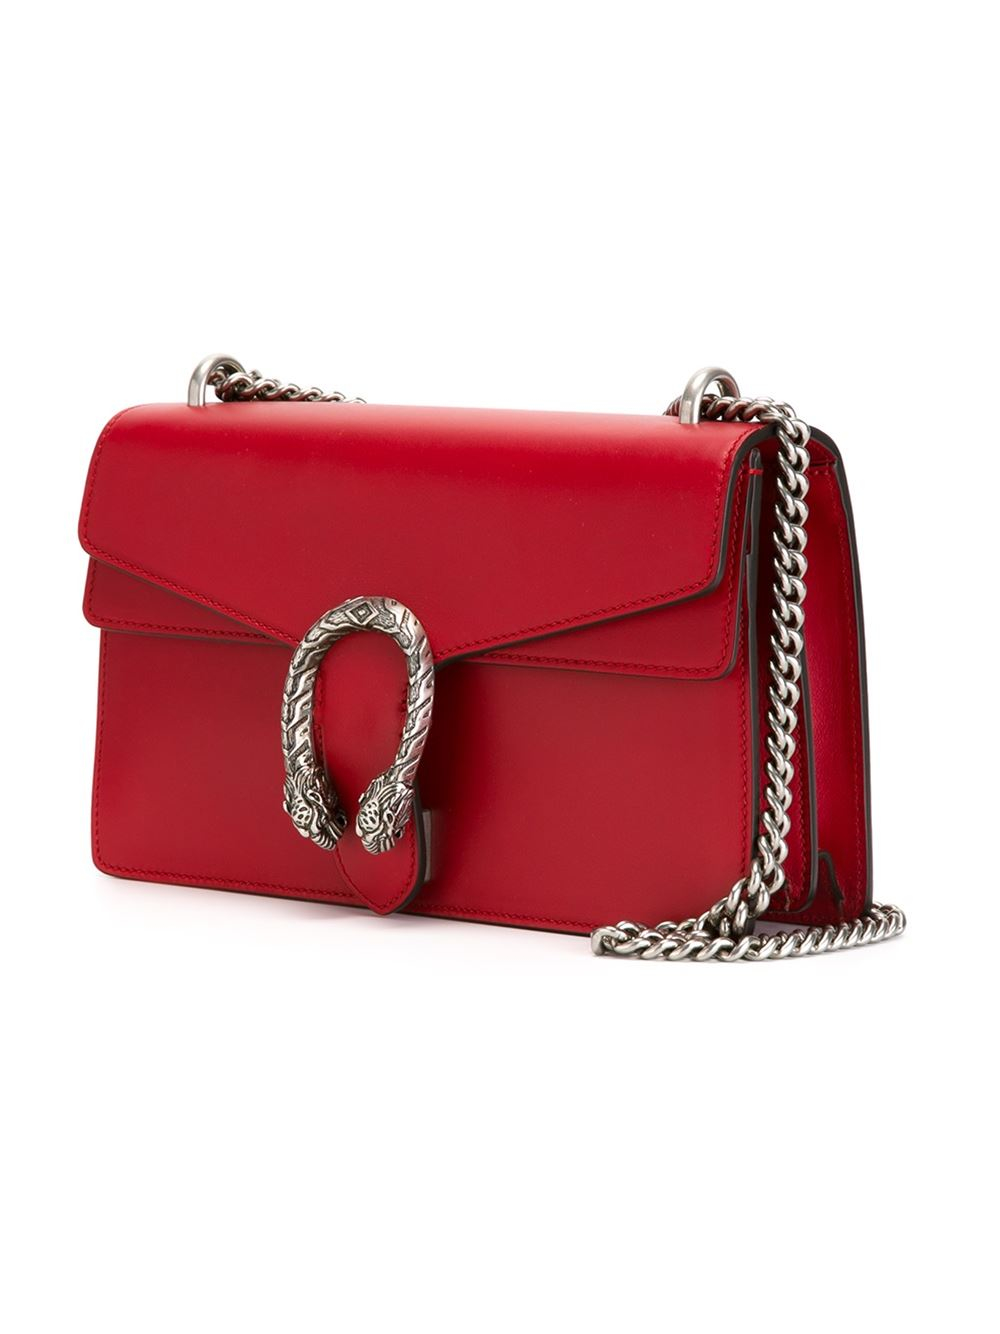 Gucci Dionysus Leather Shoulder Bag in Red | Lyst